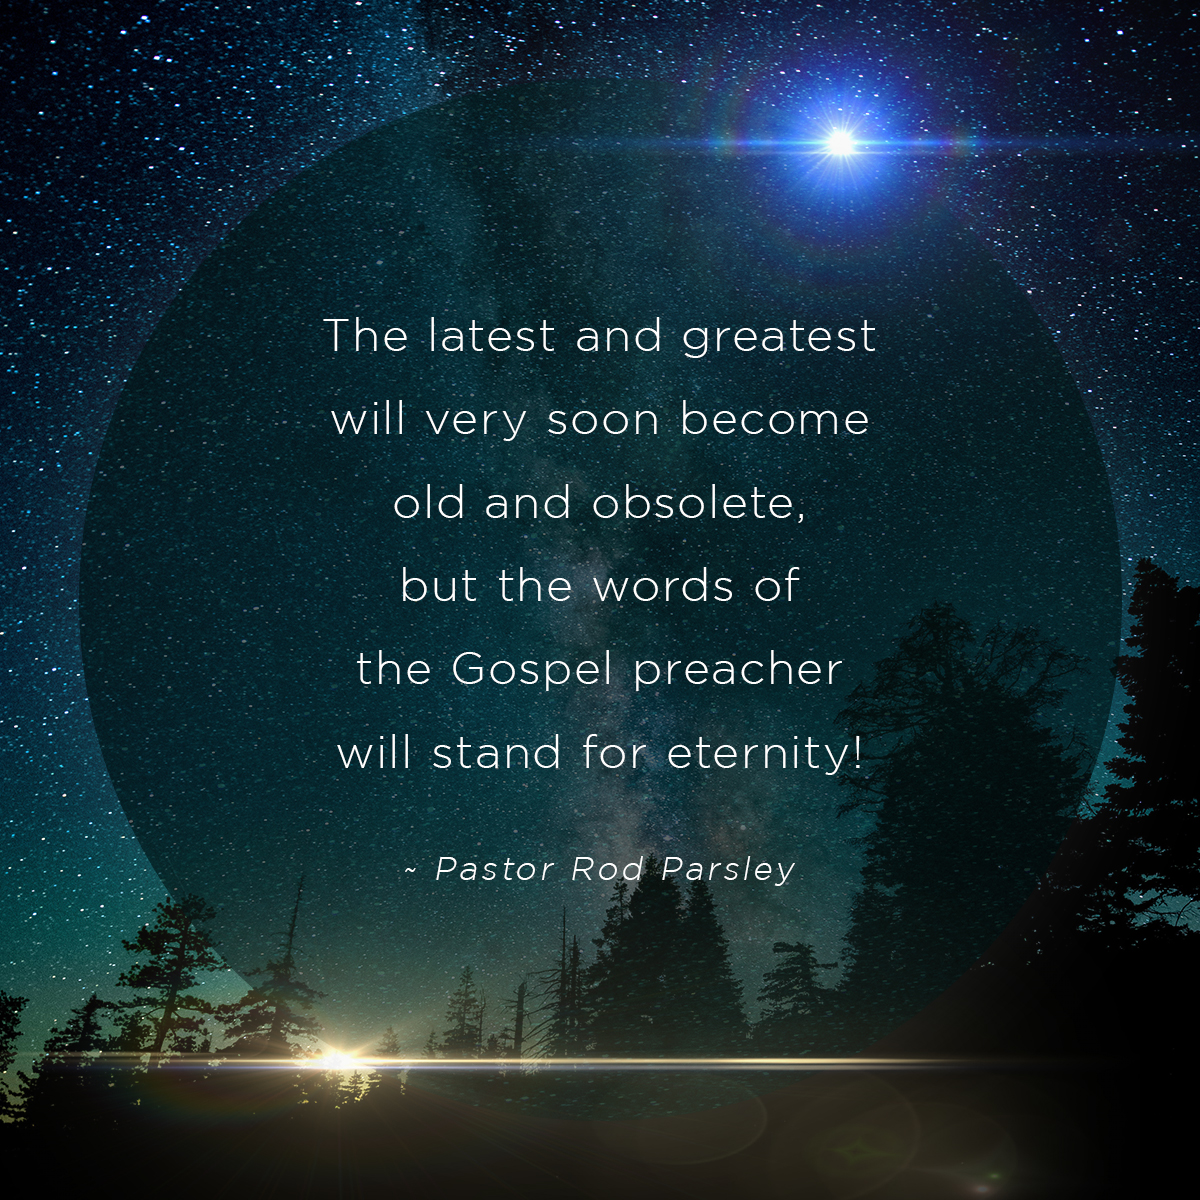 “The latest and greatest will very soon become old and obsolete, but the words of the Gospel preacher will stand for eternity!” – Pastor Rod Parsley